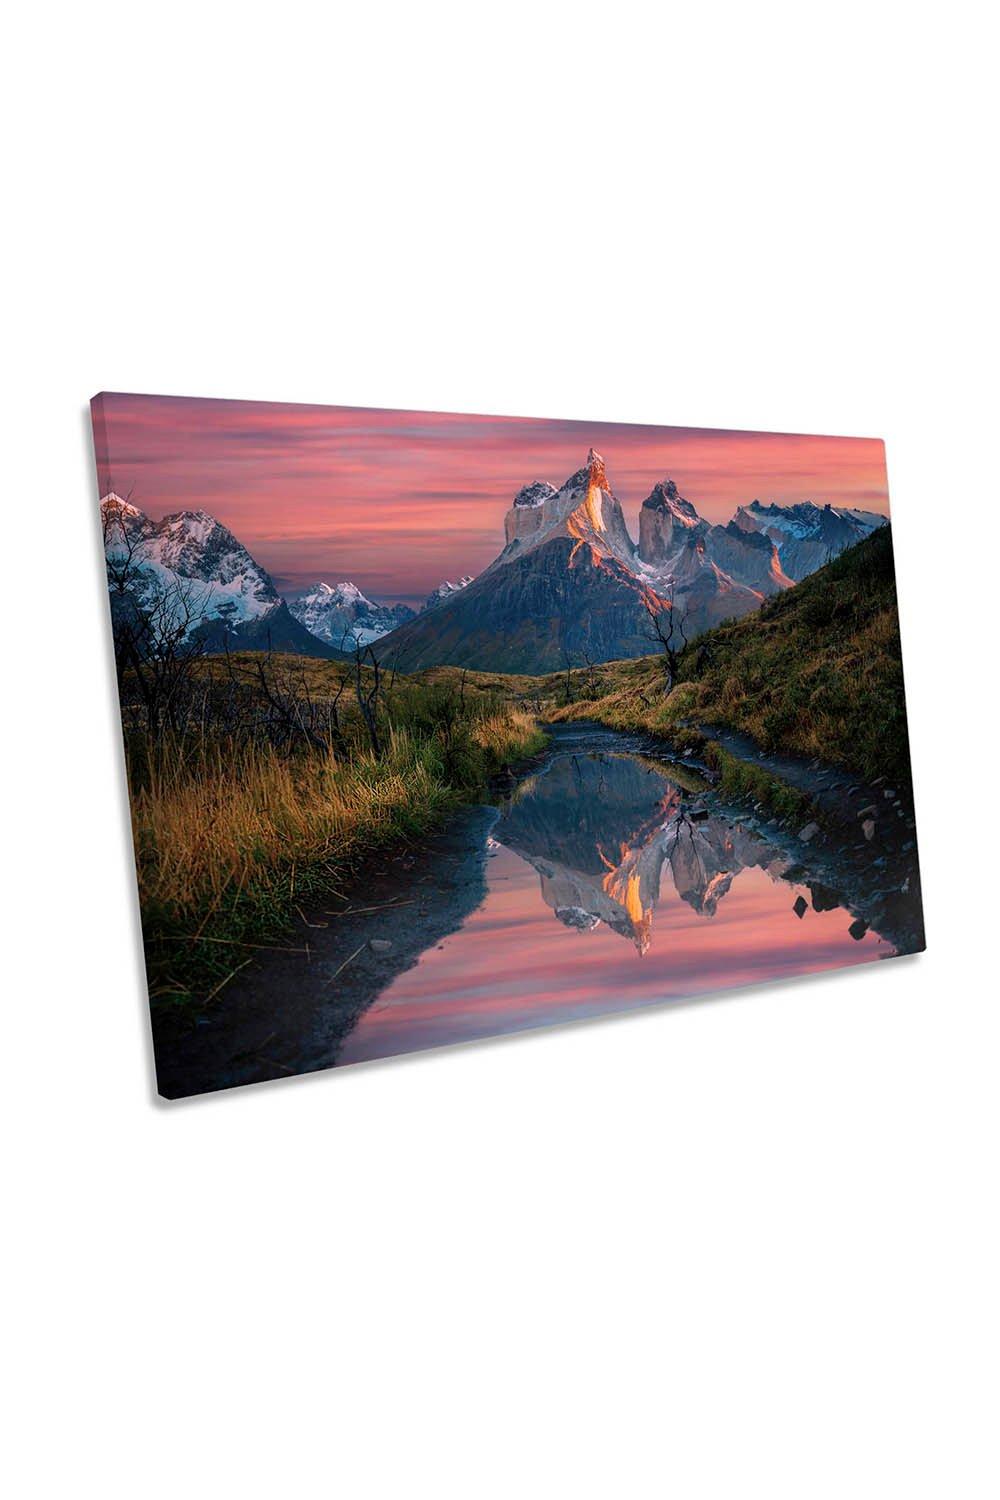 Cuernos Del Paine Pink Sunrise Canvas Wall Art Picture Print